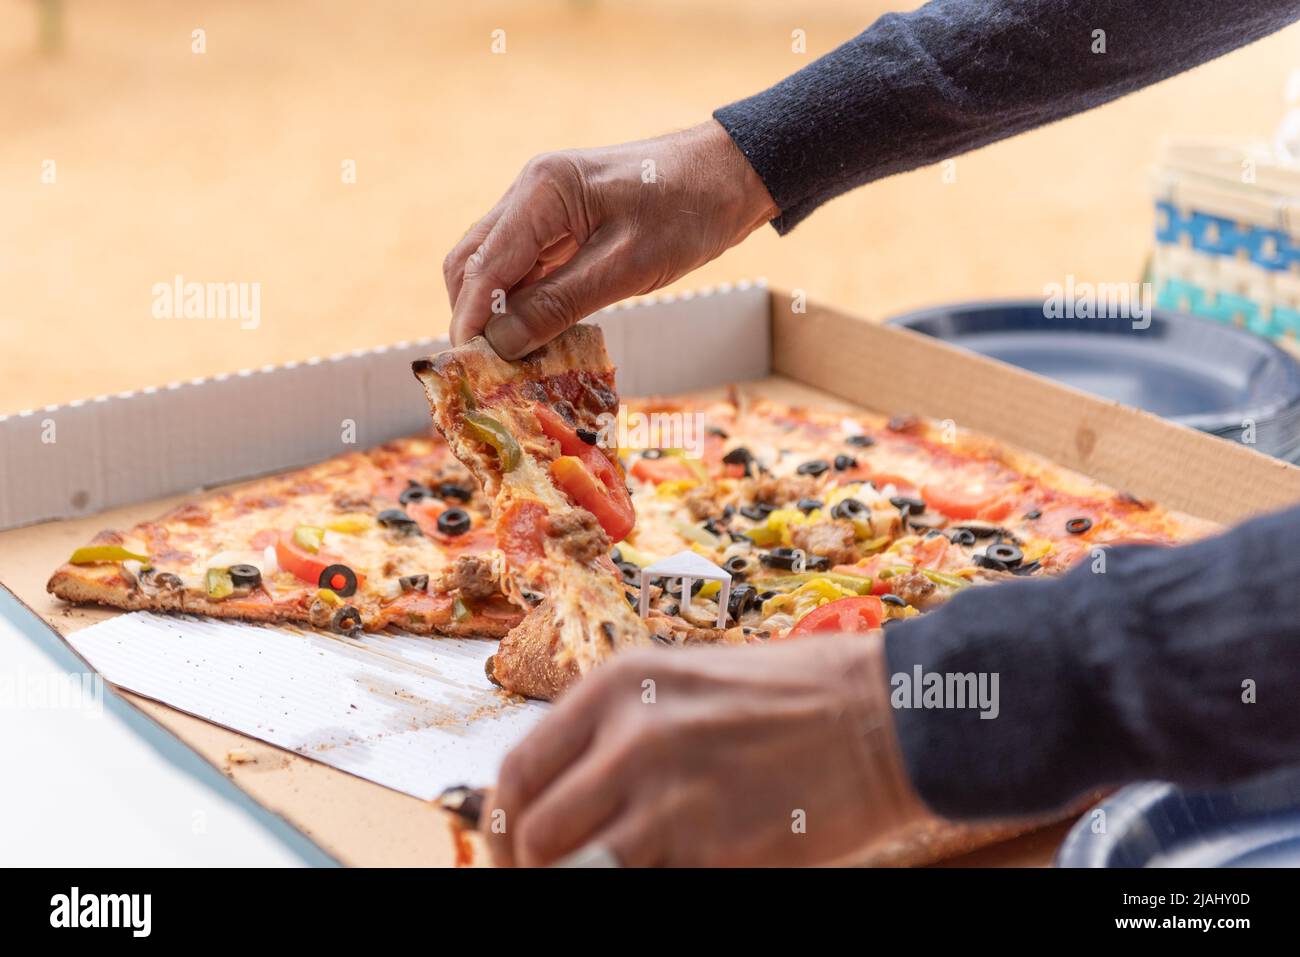 Hands of a hungry party goer pulls one slice of pizza out of the box to eat. Stock Photo